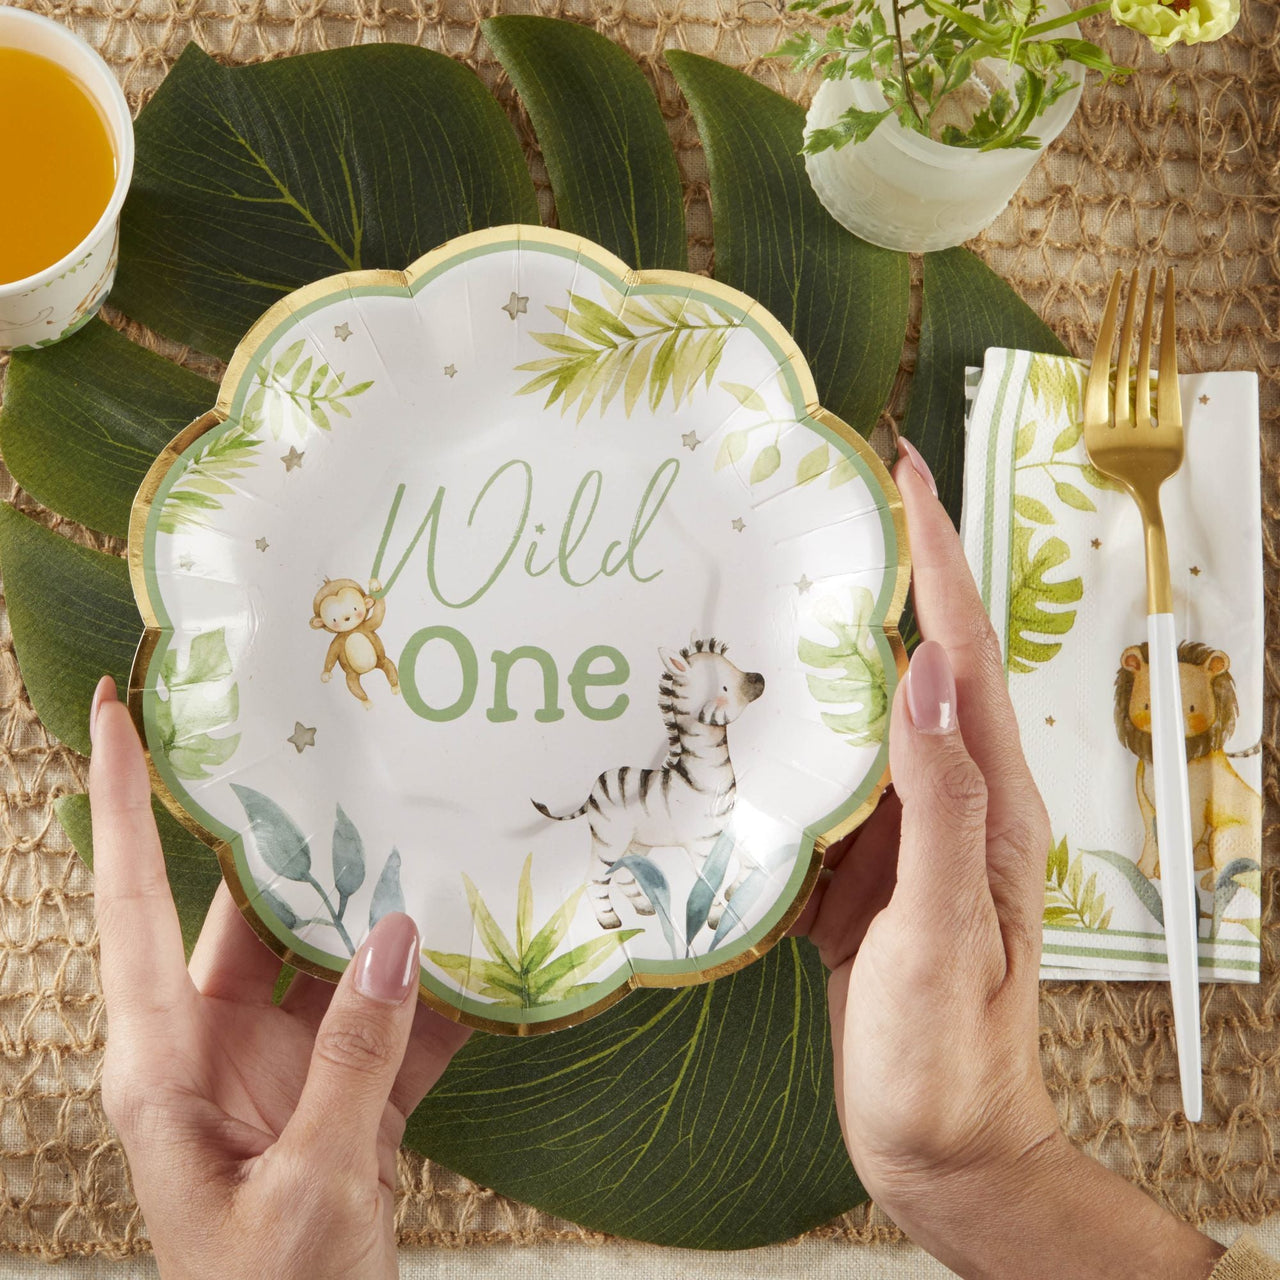 Kate Aspen Sweet As Can Bee 7 in. Premium Paper Plates (Set of 16)